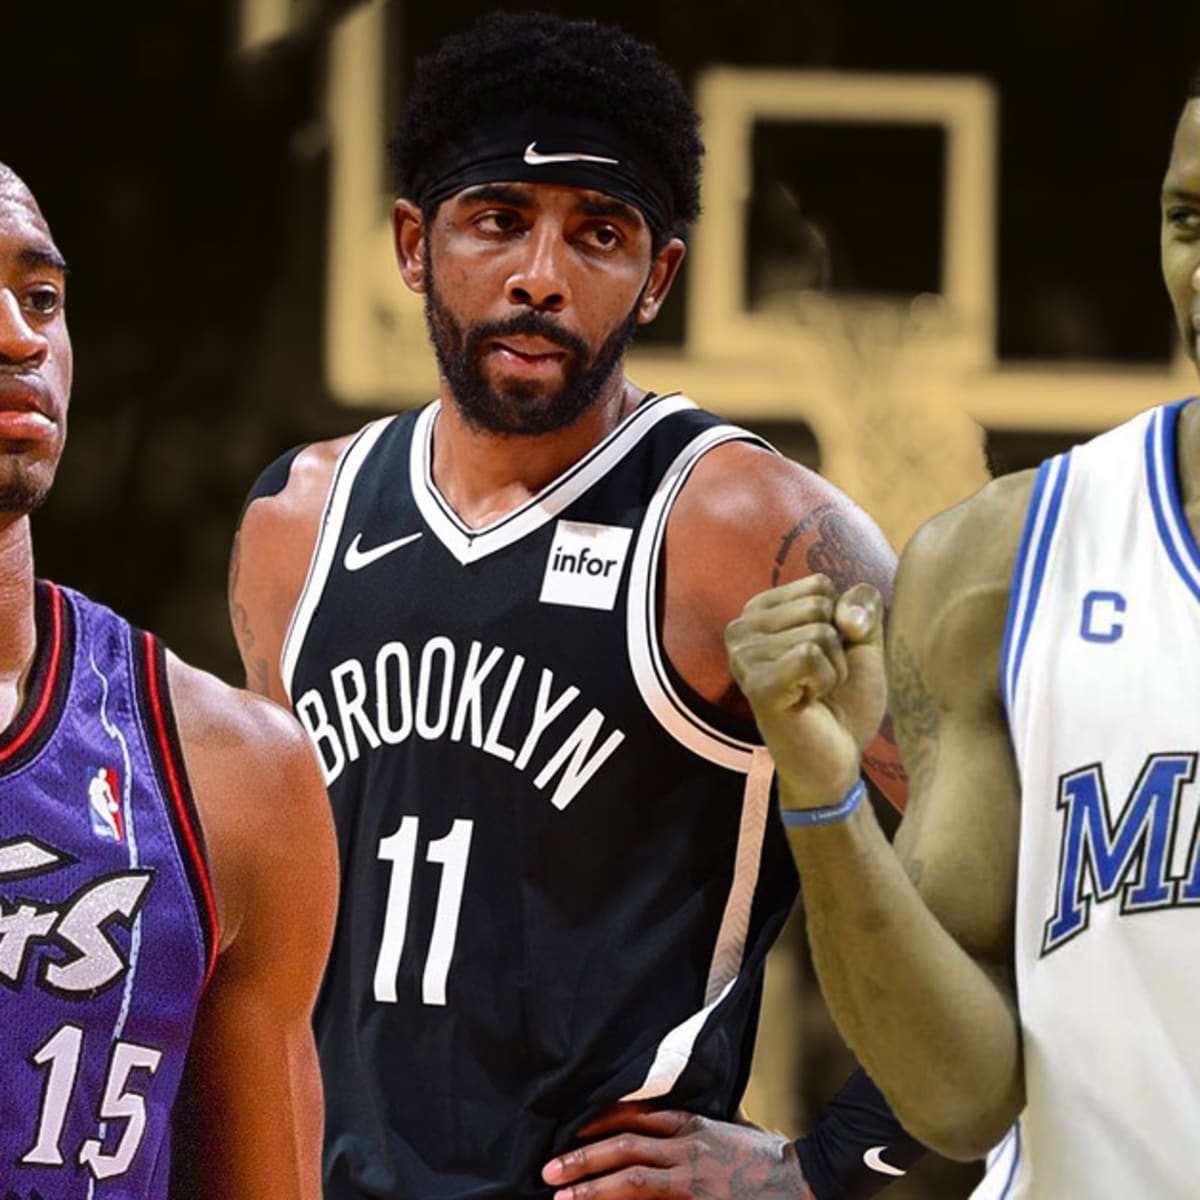 Debating the NBA's 75 greatest players list - Snubs, surprises and